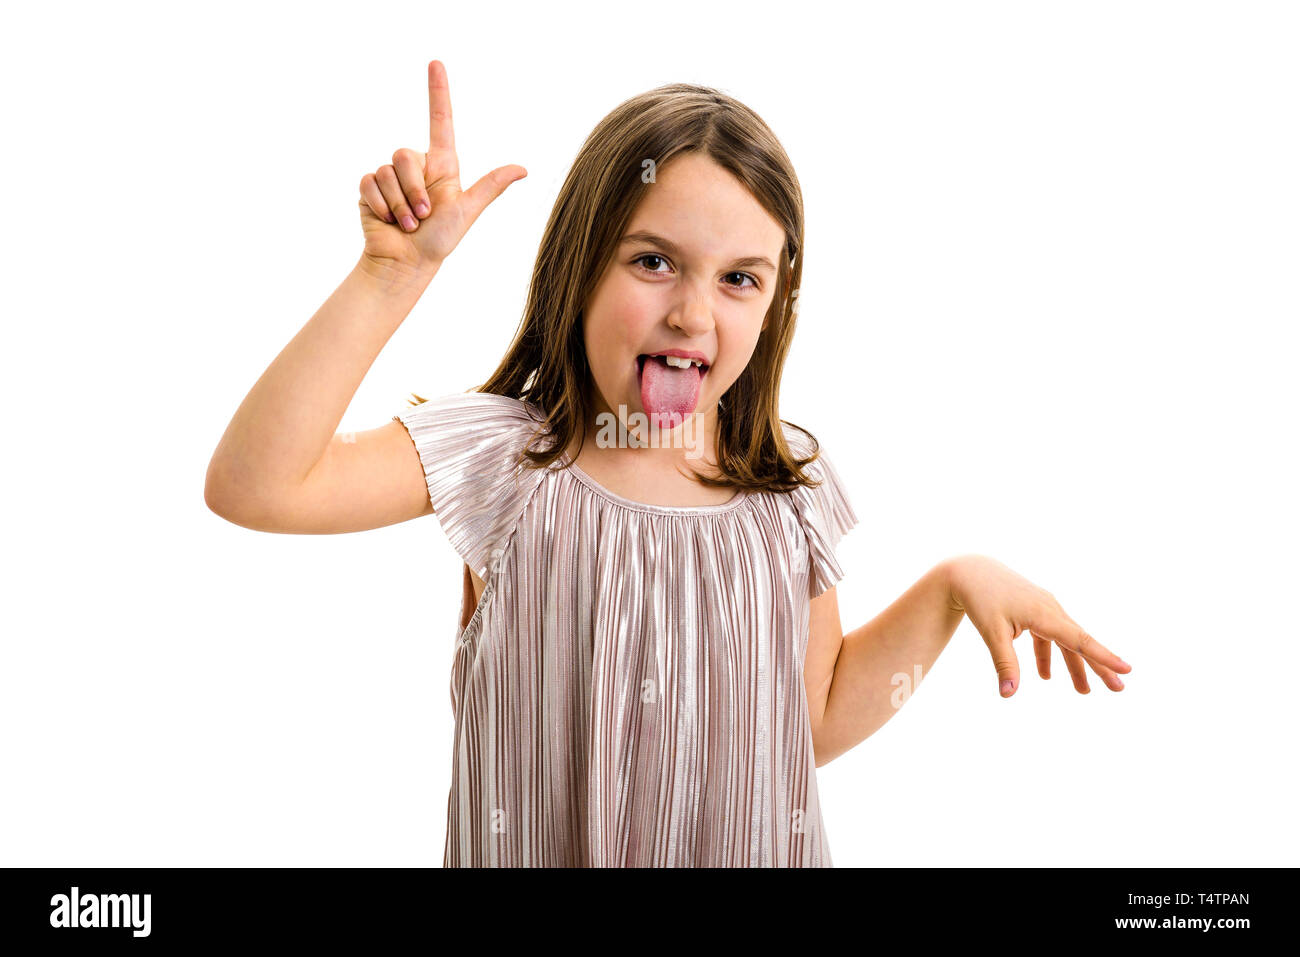 Portrait of happy girl making loser hand gesture at camera. Portrait of a cheerful cute little child girl looking at the camera, smiling showing L sig Stock Photo